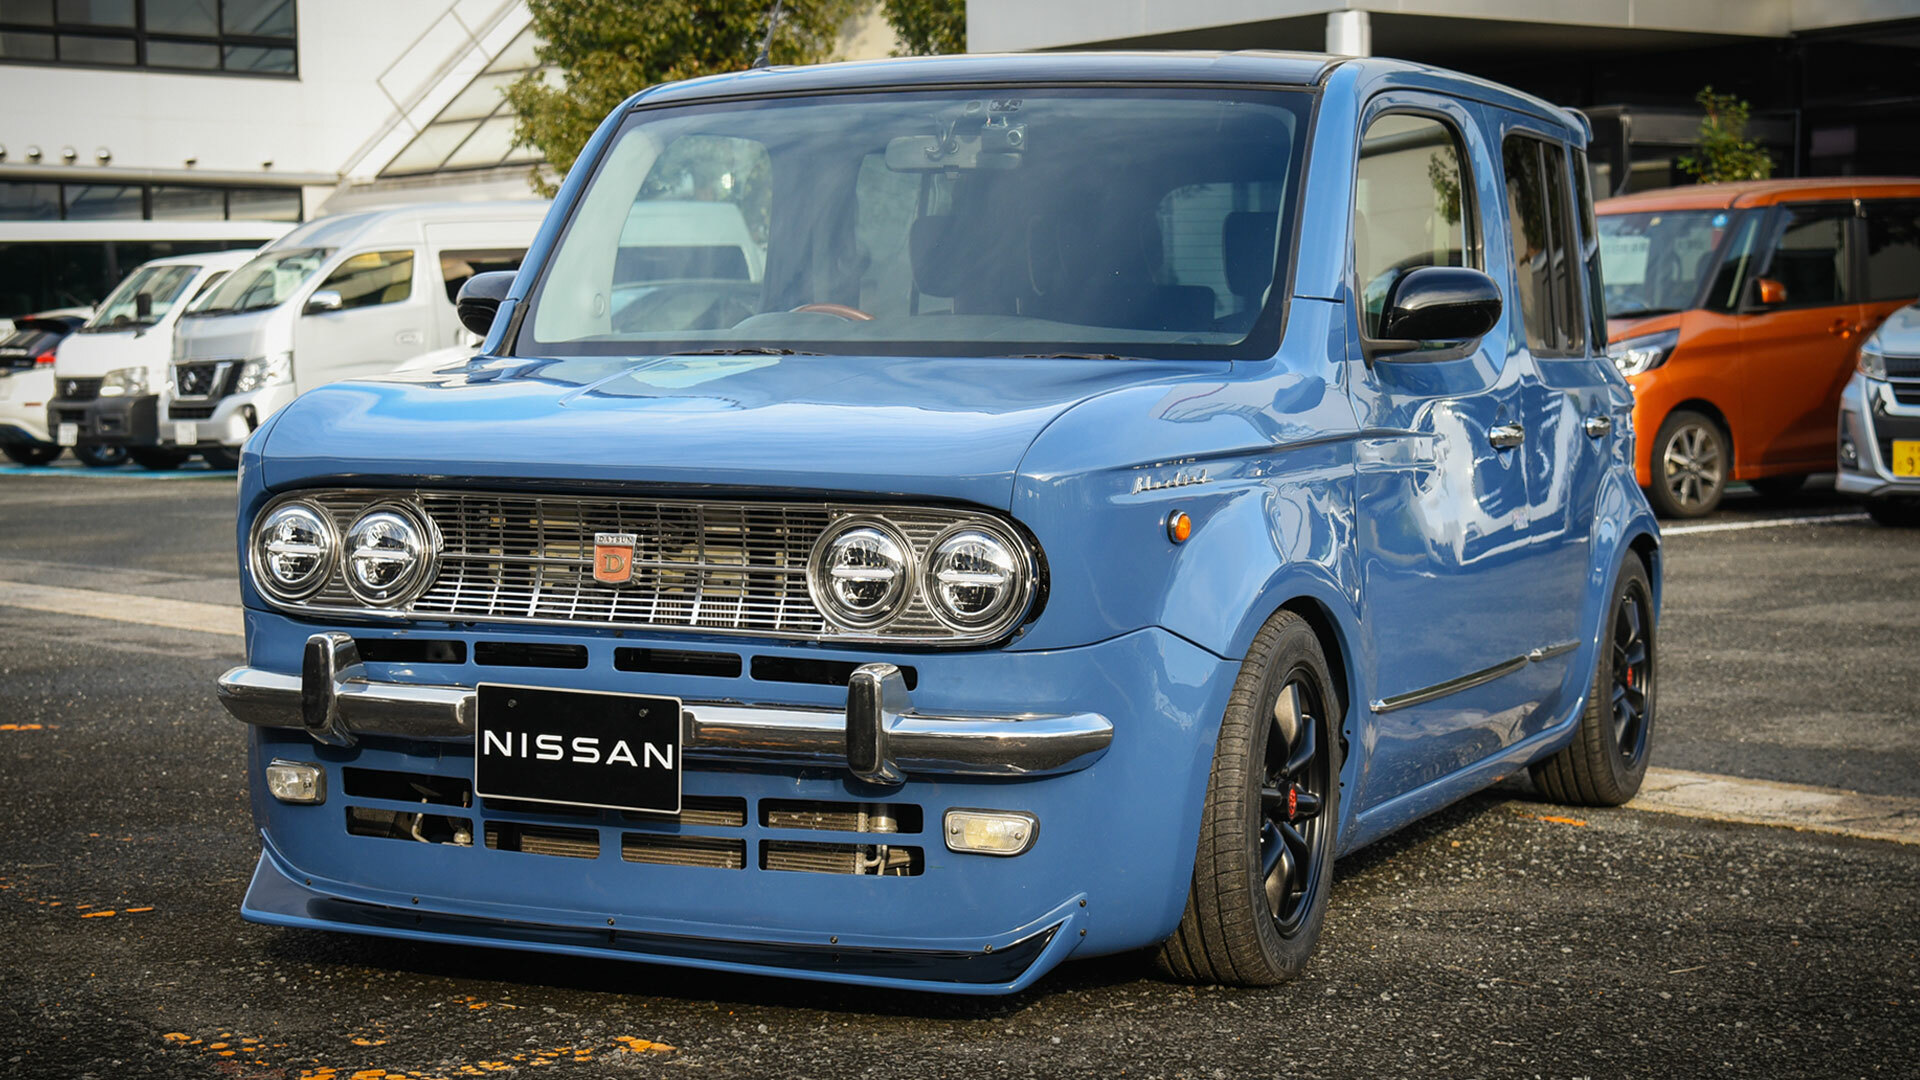 Nissan’s RetroInspired Cube Is A Blast From The Past—But Wait, There’s